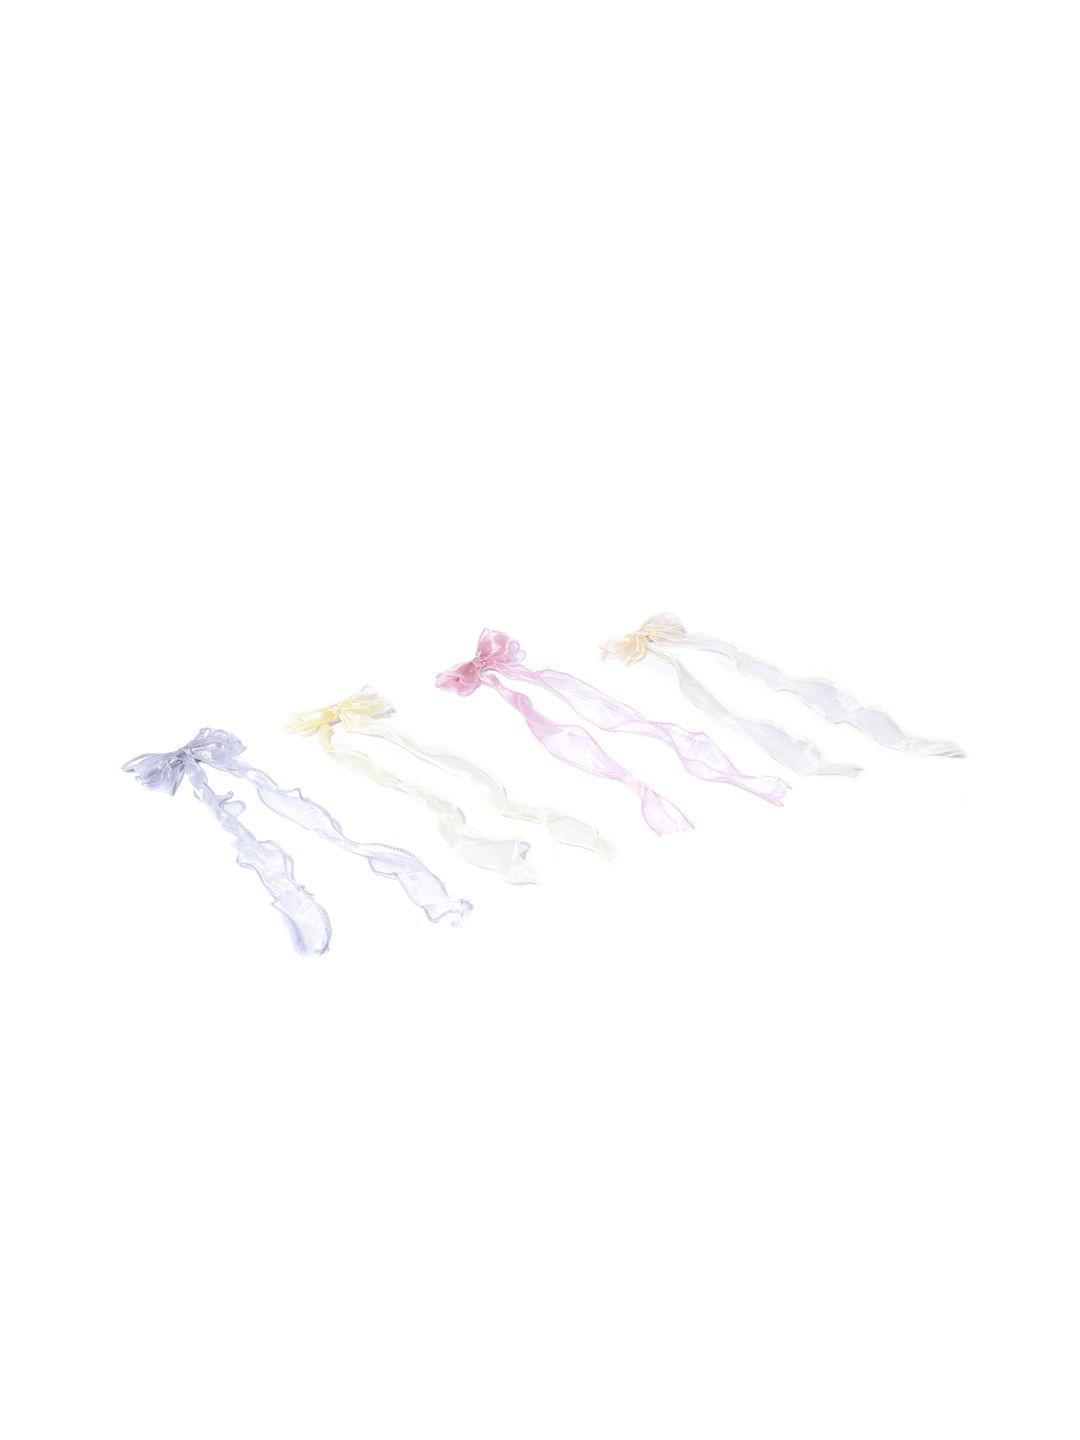 blueberry kids set of 4 alligator hair clips with ribbon bow detail